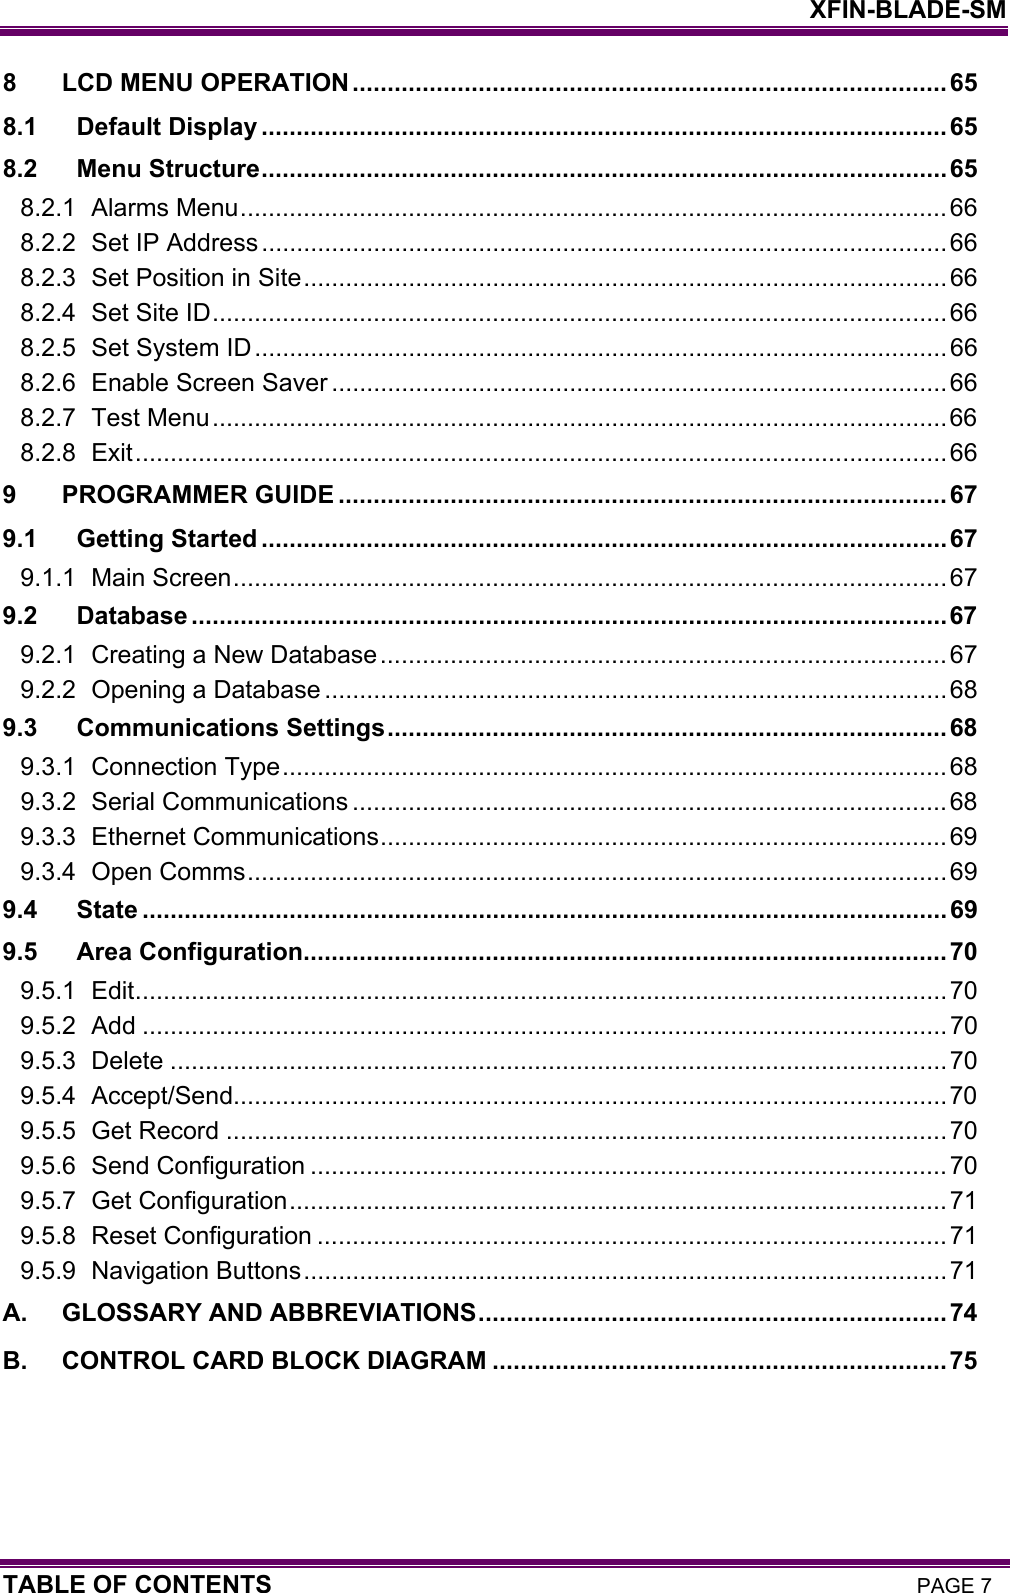    XFIN-BLADE-SM TABLE OF CONTENTS PAGE 7 8 LCD MENU OPERATION.....................................................................................65 8.1 Default Display ..................................................................................................65 8.2 Menu Structure..................................................................................................65 8.2.1 Alarms Menu..................................................................................................... 66 8.2.2 Set IP Address..................................................................................................66 8.2.3 Set Position in Site............................................................................................ 66 8.2.4 Set Site ID.........................................................................................................66 8.2.5 Set System ID...................................................................................................66 8.2.6 Enable Screen Saver ........................................................................................66 8.2.7 Test Menu.........................................................................................................66 8.2.8 Exit....................................................................................................................66 9 PROGRAMMER GUIDE .......................................................................................67 9.1 Getting Started ..................................................................................................67 9.1.1 Main Screen...................................................................................................... 67 9.2 Database ............................................................................................................67 9.2.1 Creating a New Database.................................................................................67 9.2.2 Opening a Database .........................................................................................68 9.3 Communications Settings................................................................................ 68 9.3.1 Connection Type............................................................................................... 68 9.3.2 Serial Communications .....................................................................................68 9.3.3 Ethernet Communications.................................................................................69 9.3.4 Open Comms.................................................................................................... 69 9.4 State ...................................................................................................................69 9.5 Area Configuration............................................................................................70 9.5.1 Edit....................................................................................................................70 9.5.2 Add ...................................................................................................................70 9.5.3 Delete ...............................................................................................................70 9.5.4 Accept/Send......................................................................................................70 9.5.5 Get Record .......................................................................................................70 9.5.6 Send Configuration ...........................................................................................70 9.5.7 Get Configuration..............................................................................................71 9.5.8 Reset Configuration ..........................................................................................71 9.5.9 Navigation Buttons............................................................................................71 A. GLOSSARY AND ABBREVIATIONS...................................................................74 B. CONTROL CARD BLOCK DIAGRAM .................................................................75  